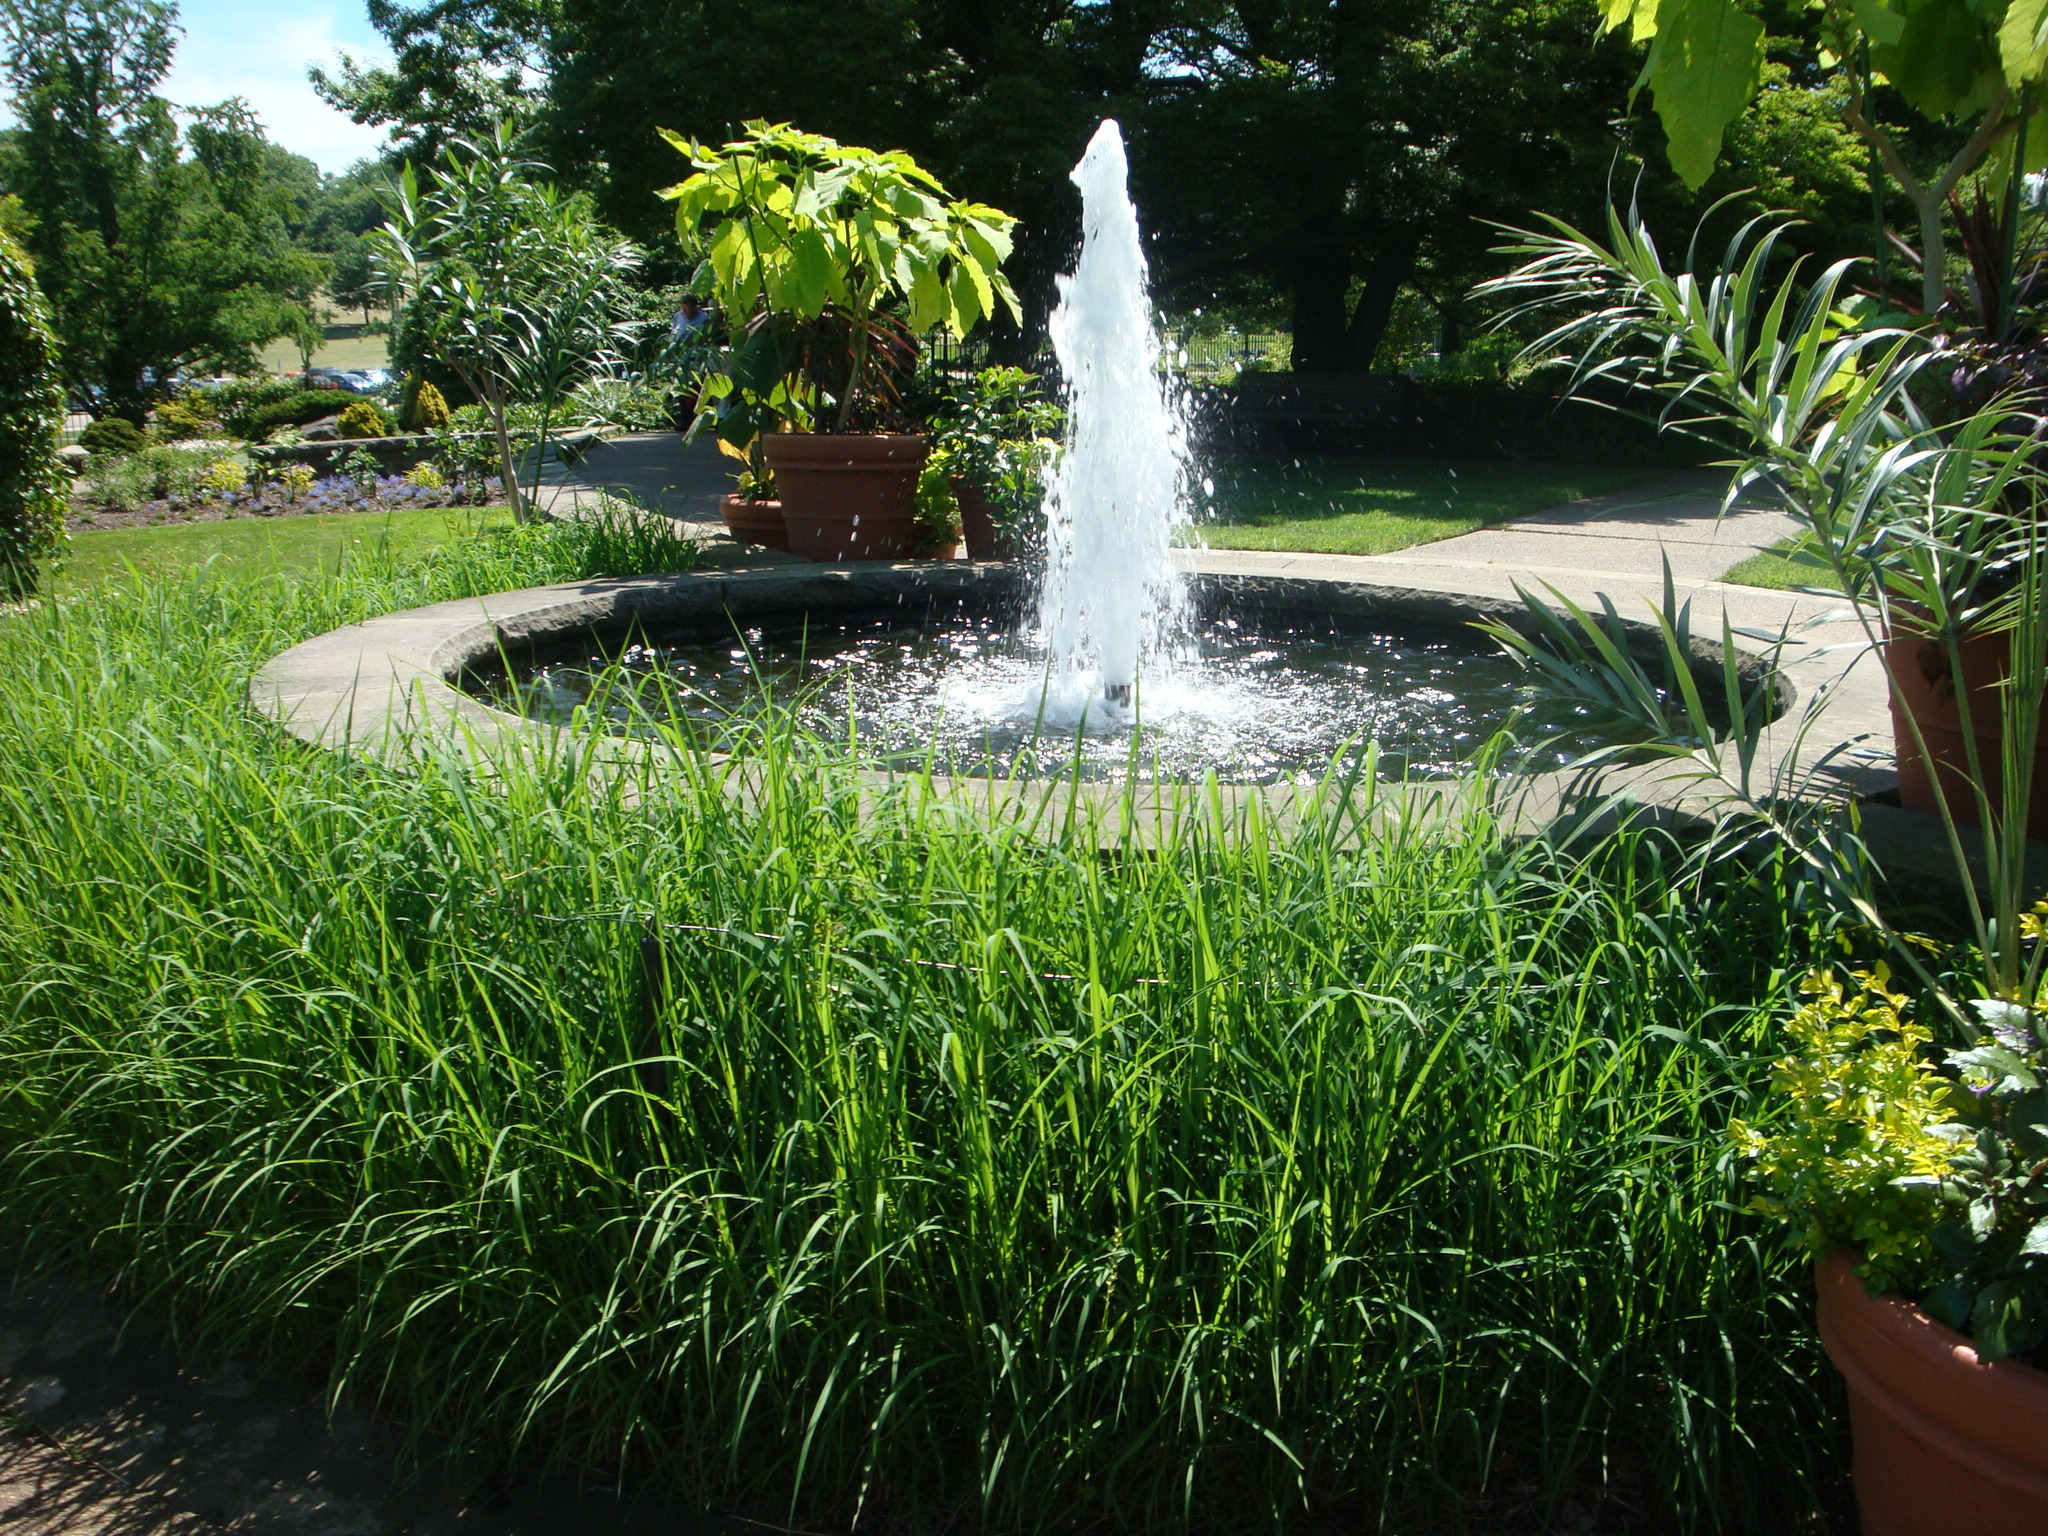 Formal Water  Features  in Landscape Design  Revolutionary 